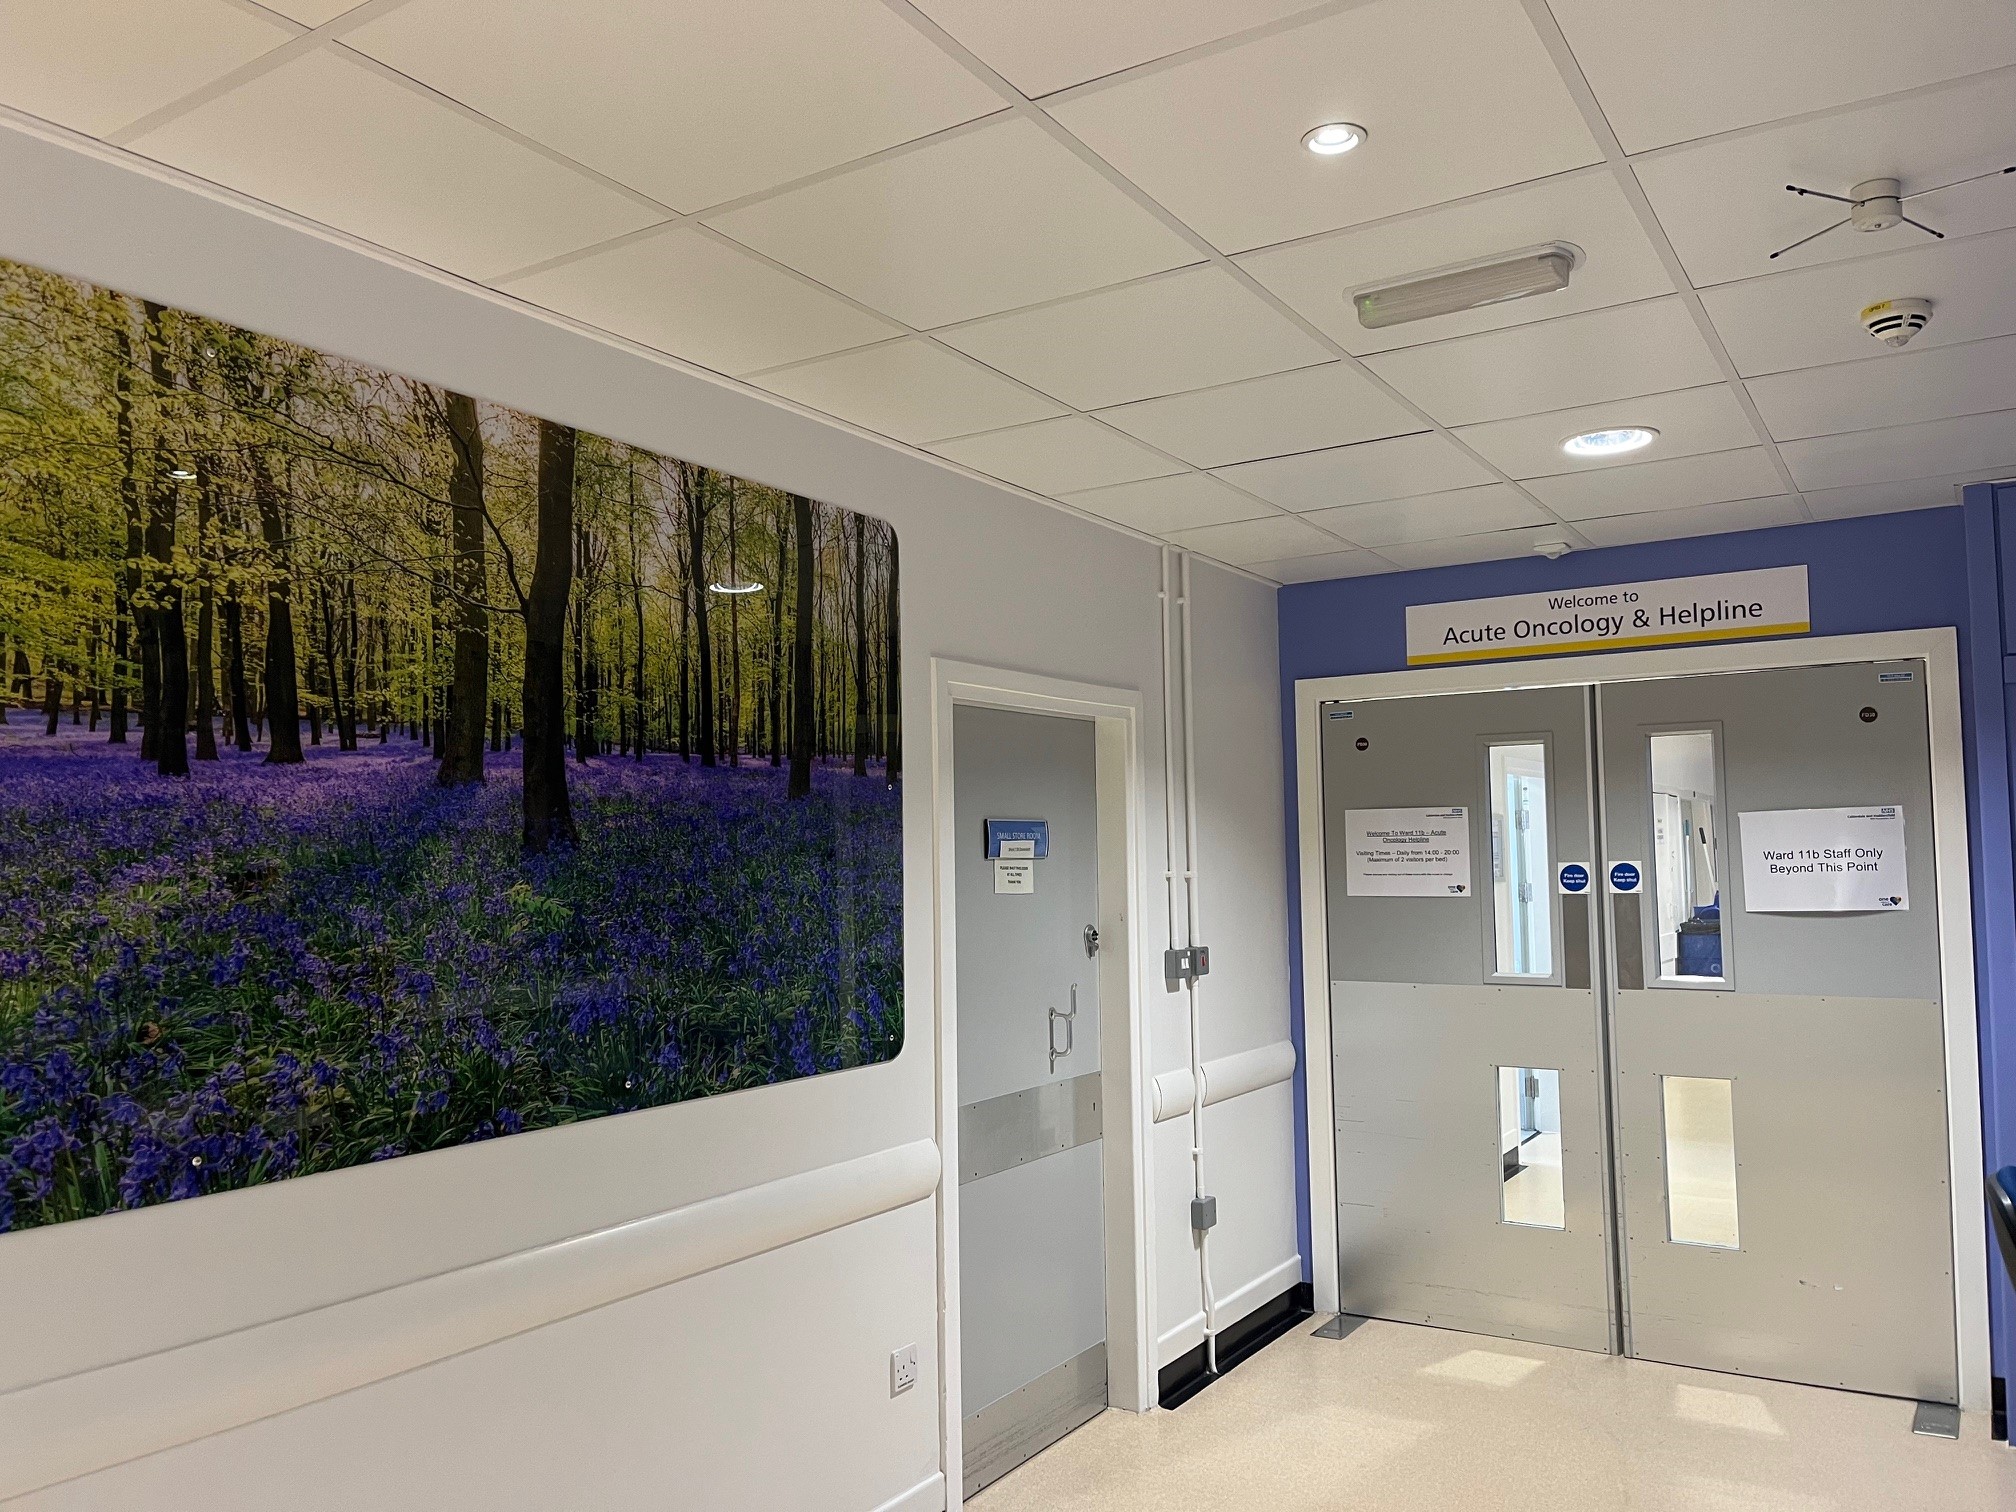 Newly-refurbished non-surgical oncology ward opens at Calderdale and Huddersfield NHS Foundation Trust in partnership with Mid Yorkshire Teaching Trust